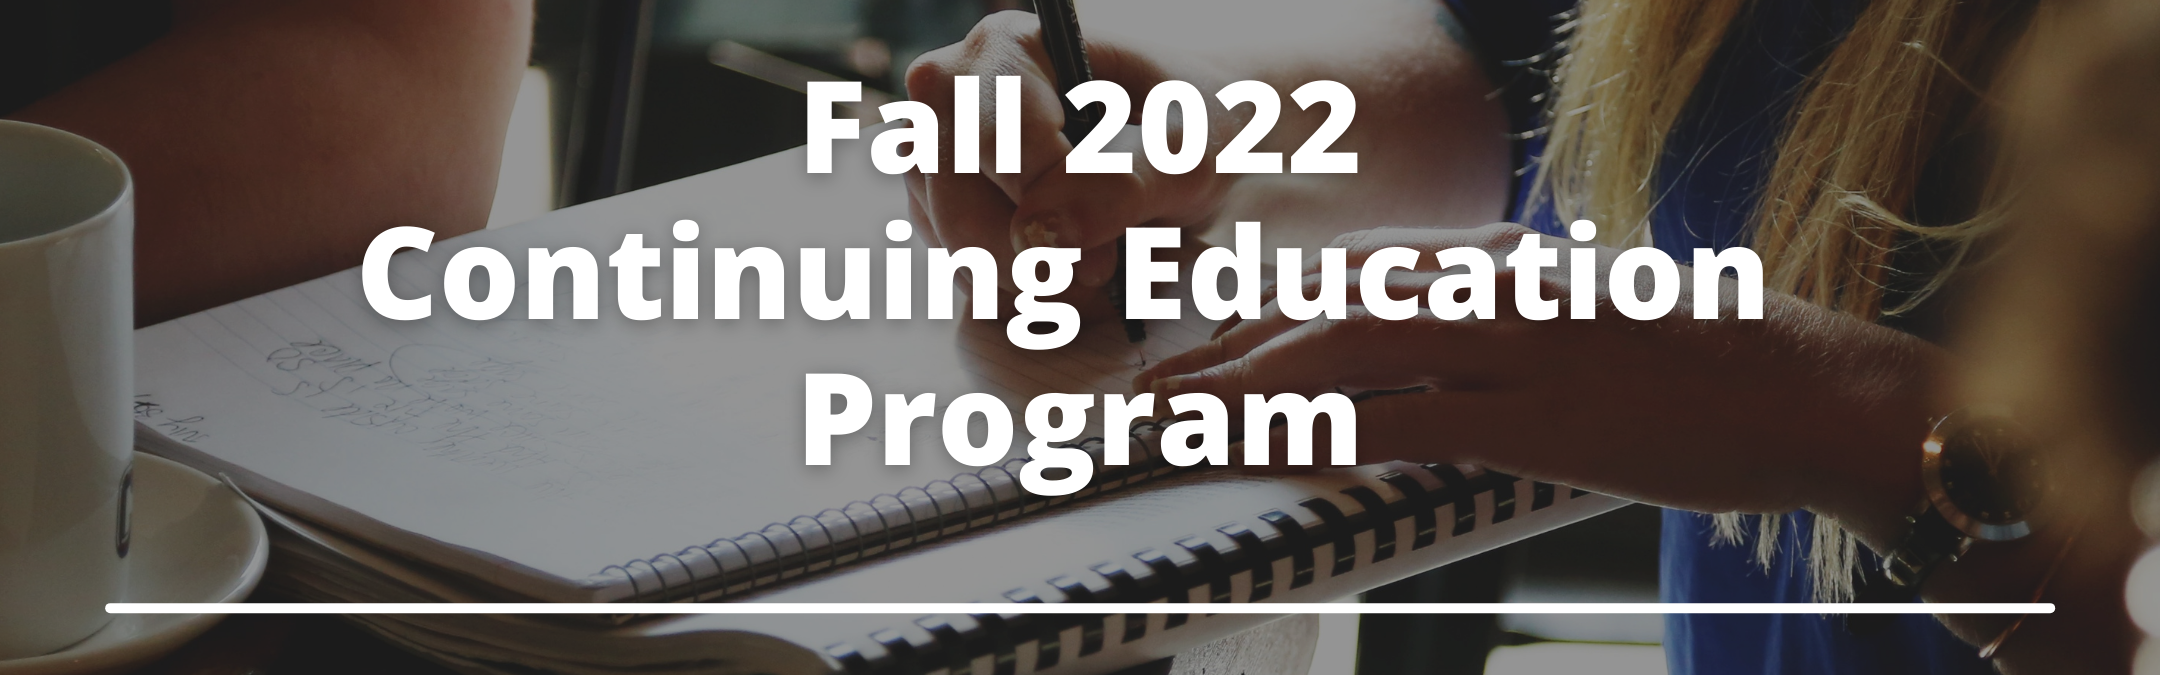 RCS launches Continuing Education classes for Fall ‘22